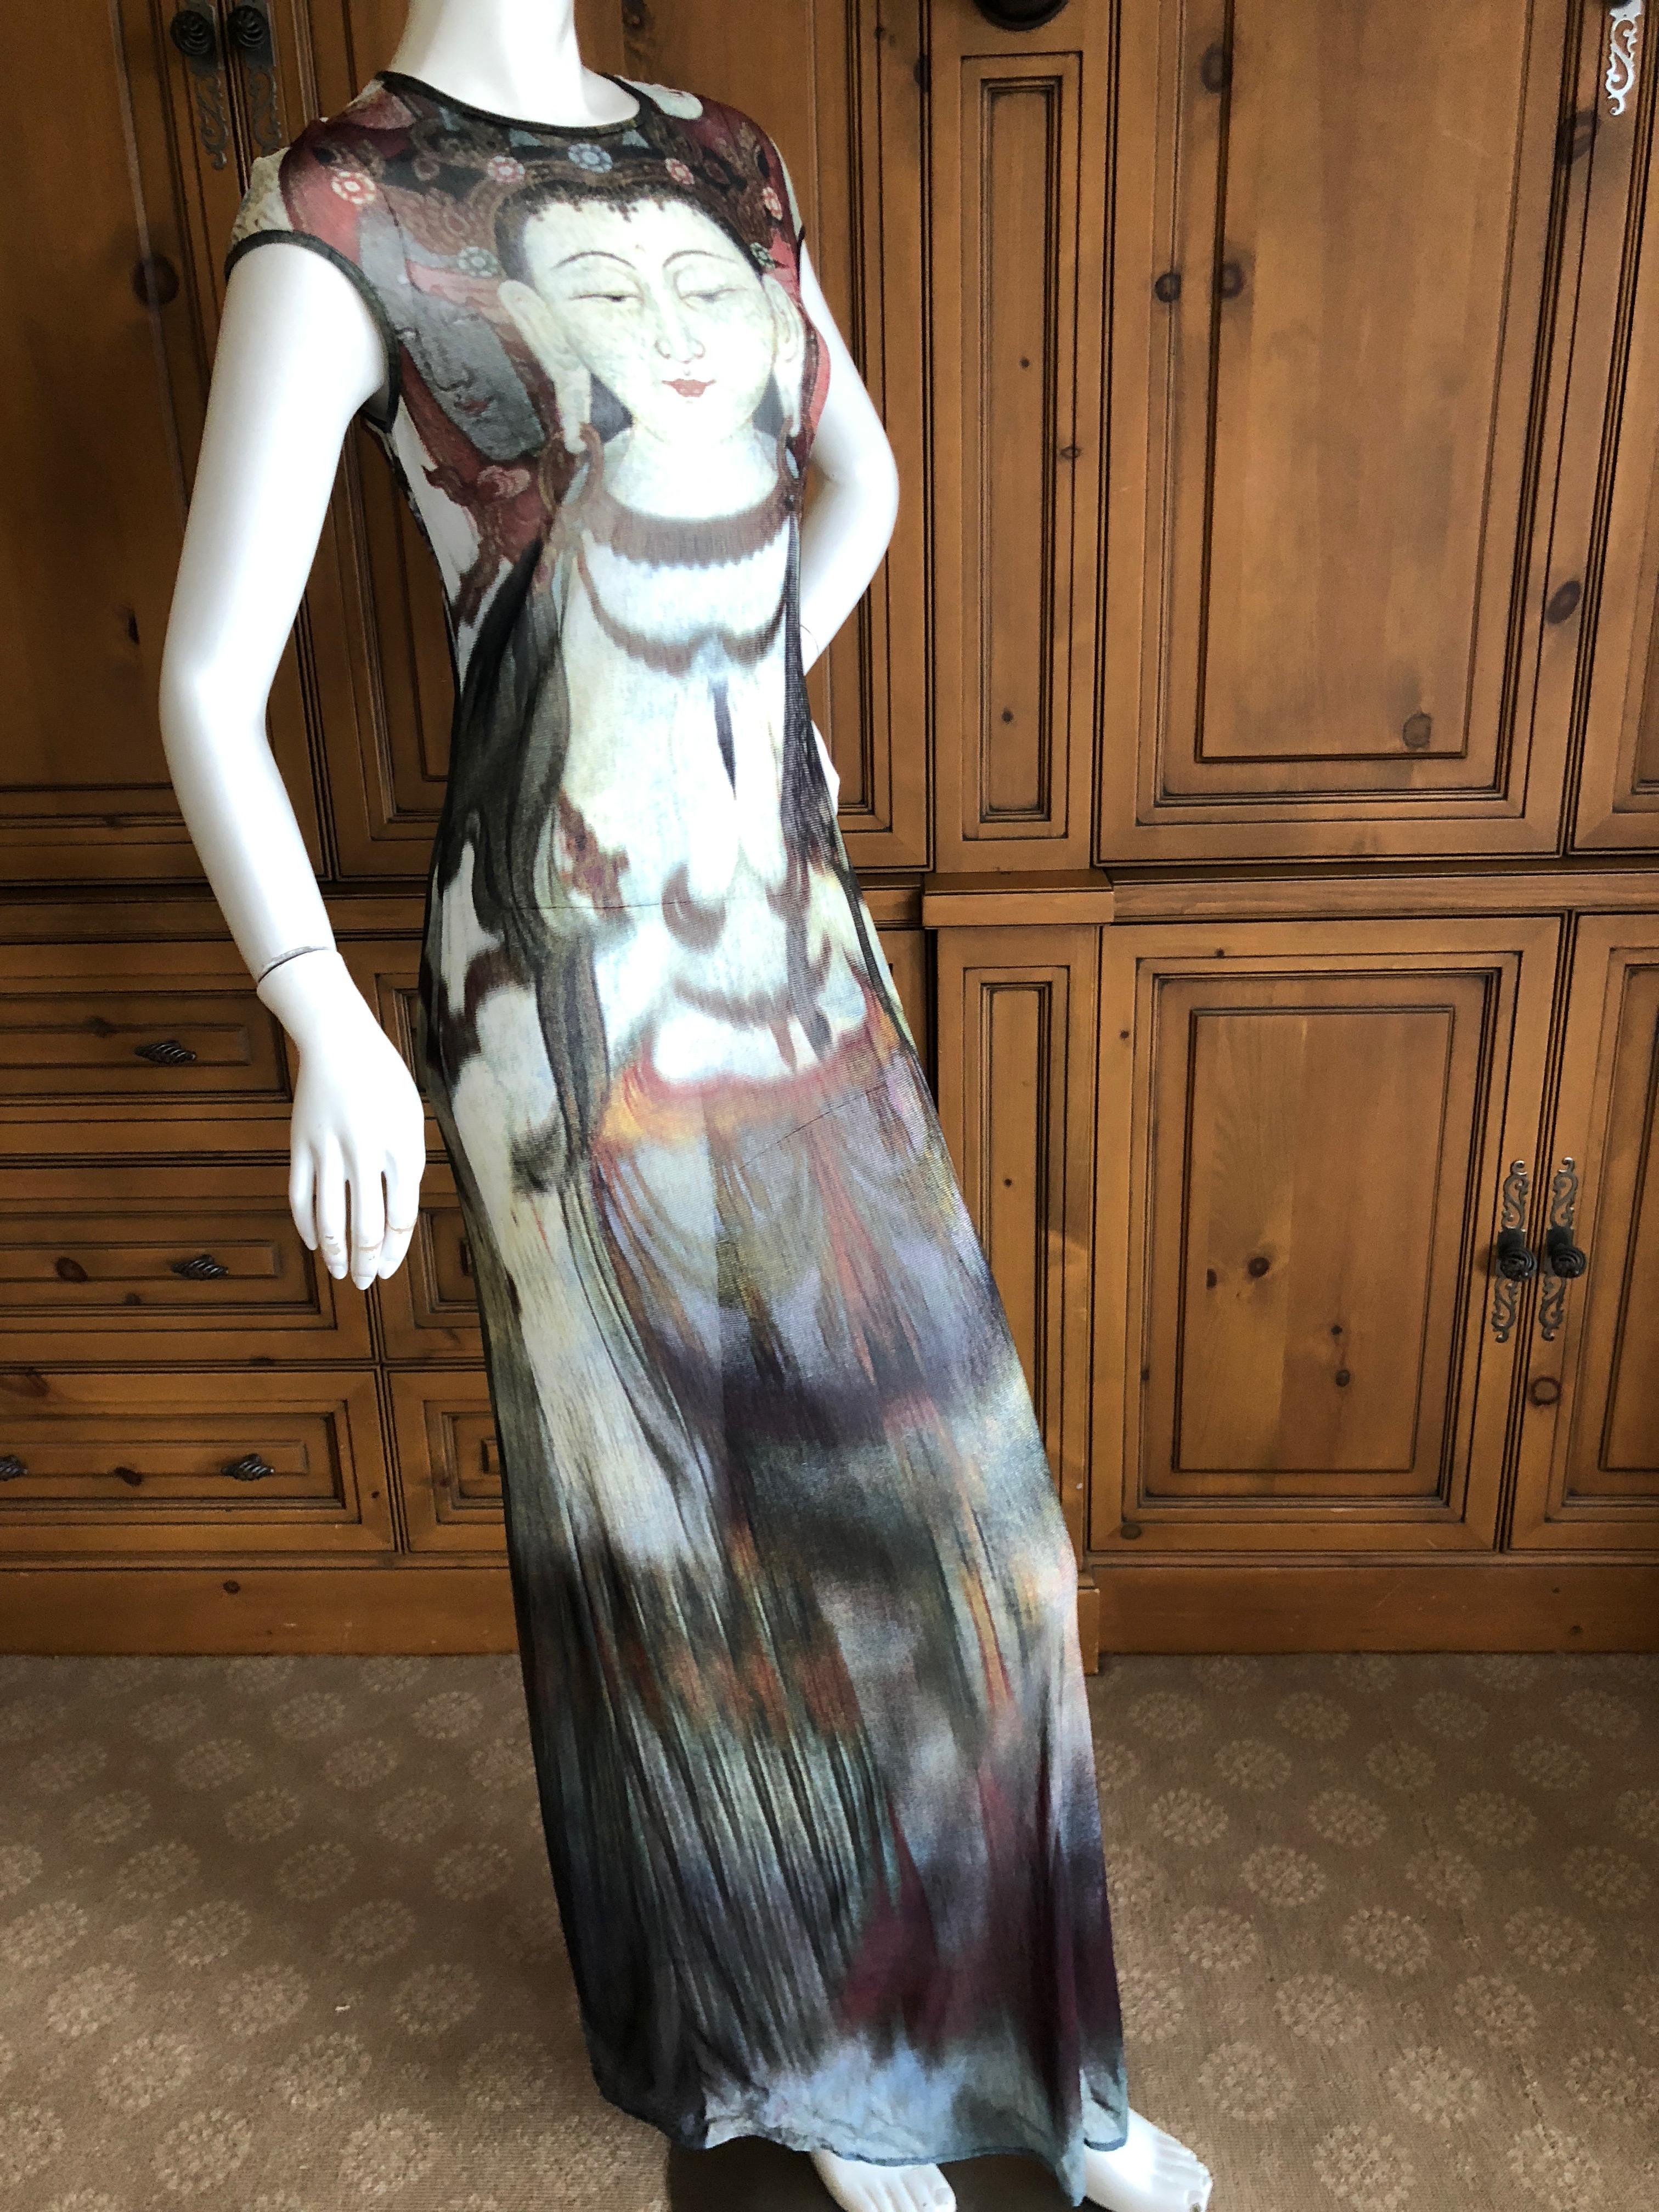 Vivienne Tam Vintage Buddha Dress
This is such a charming piece.
Size 2
Bust  36